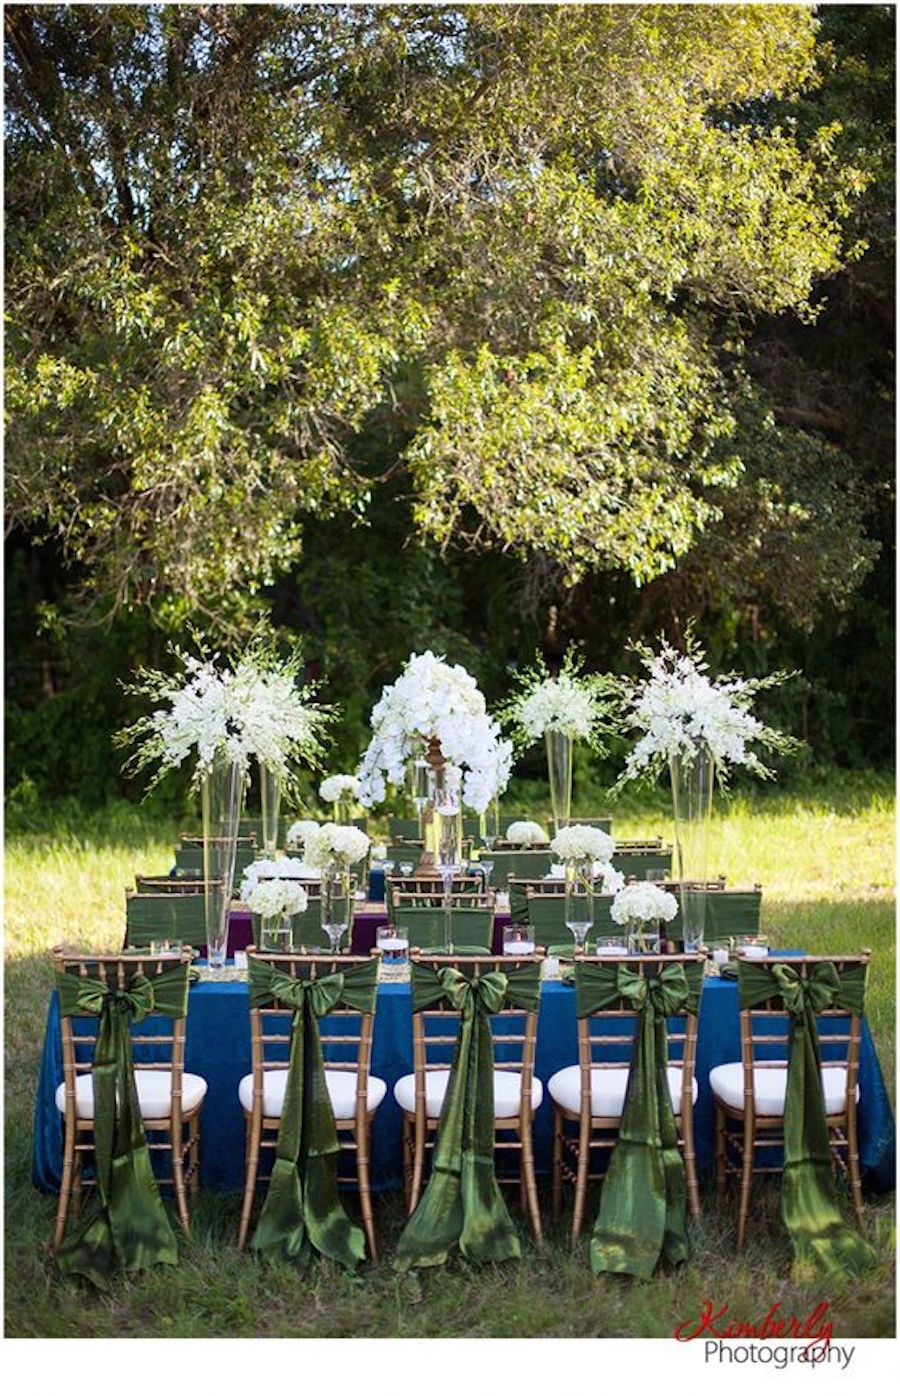 Outdoor Wedding Reception with Chiavari Chairs and Emerald Green Chair Sashes and Blue Table Linens | Tampa Bay Wedding Rental Linens by Connie Duglin Specialty Linens